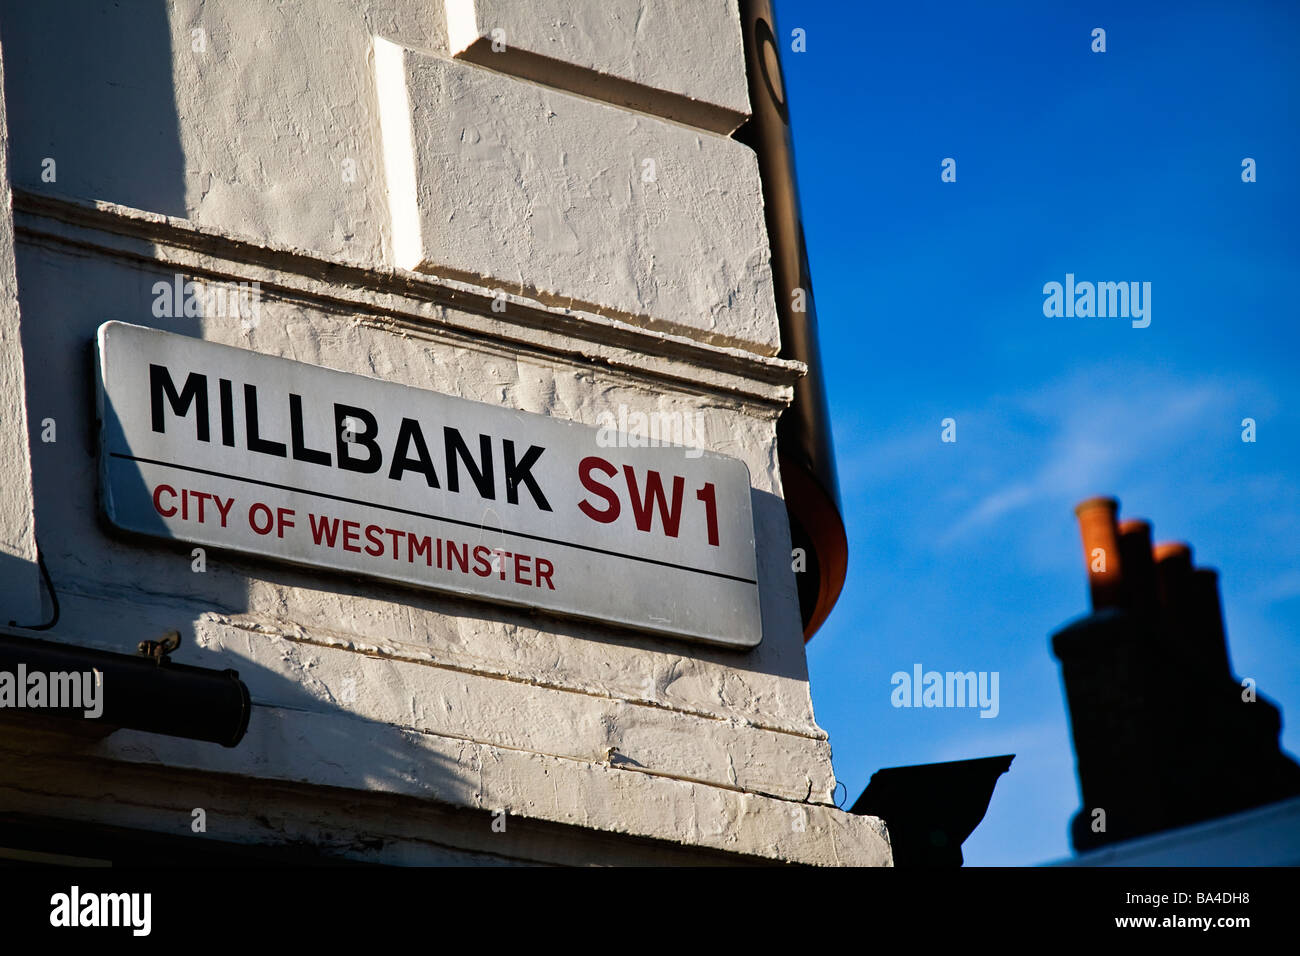 Millbank, London SW1. Road sign. Stock Photo